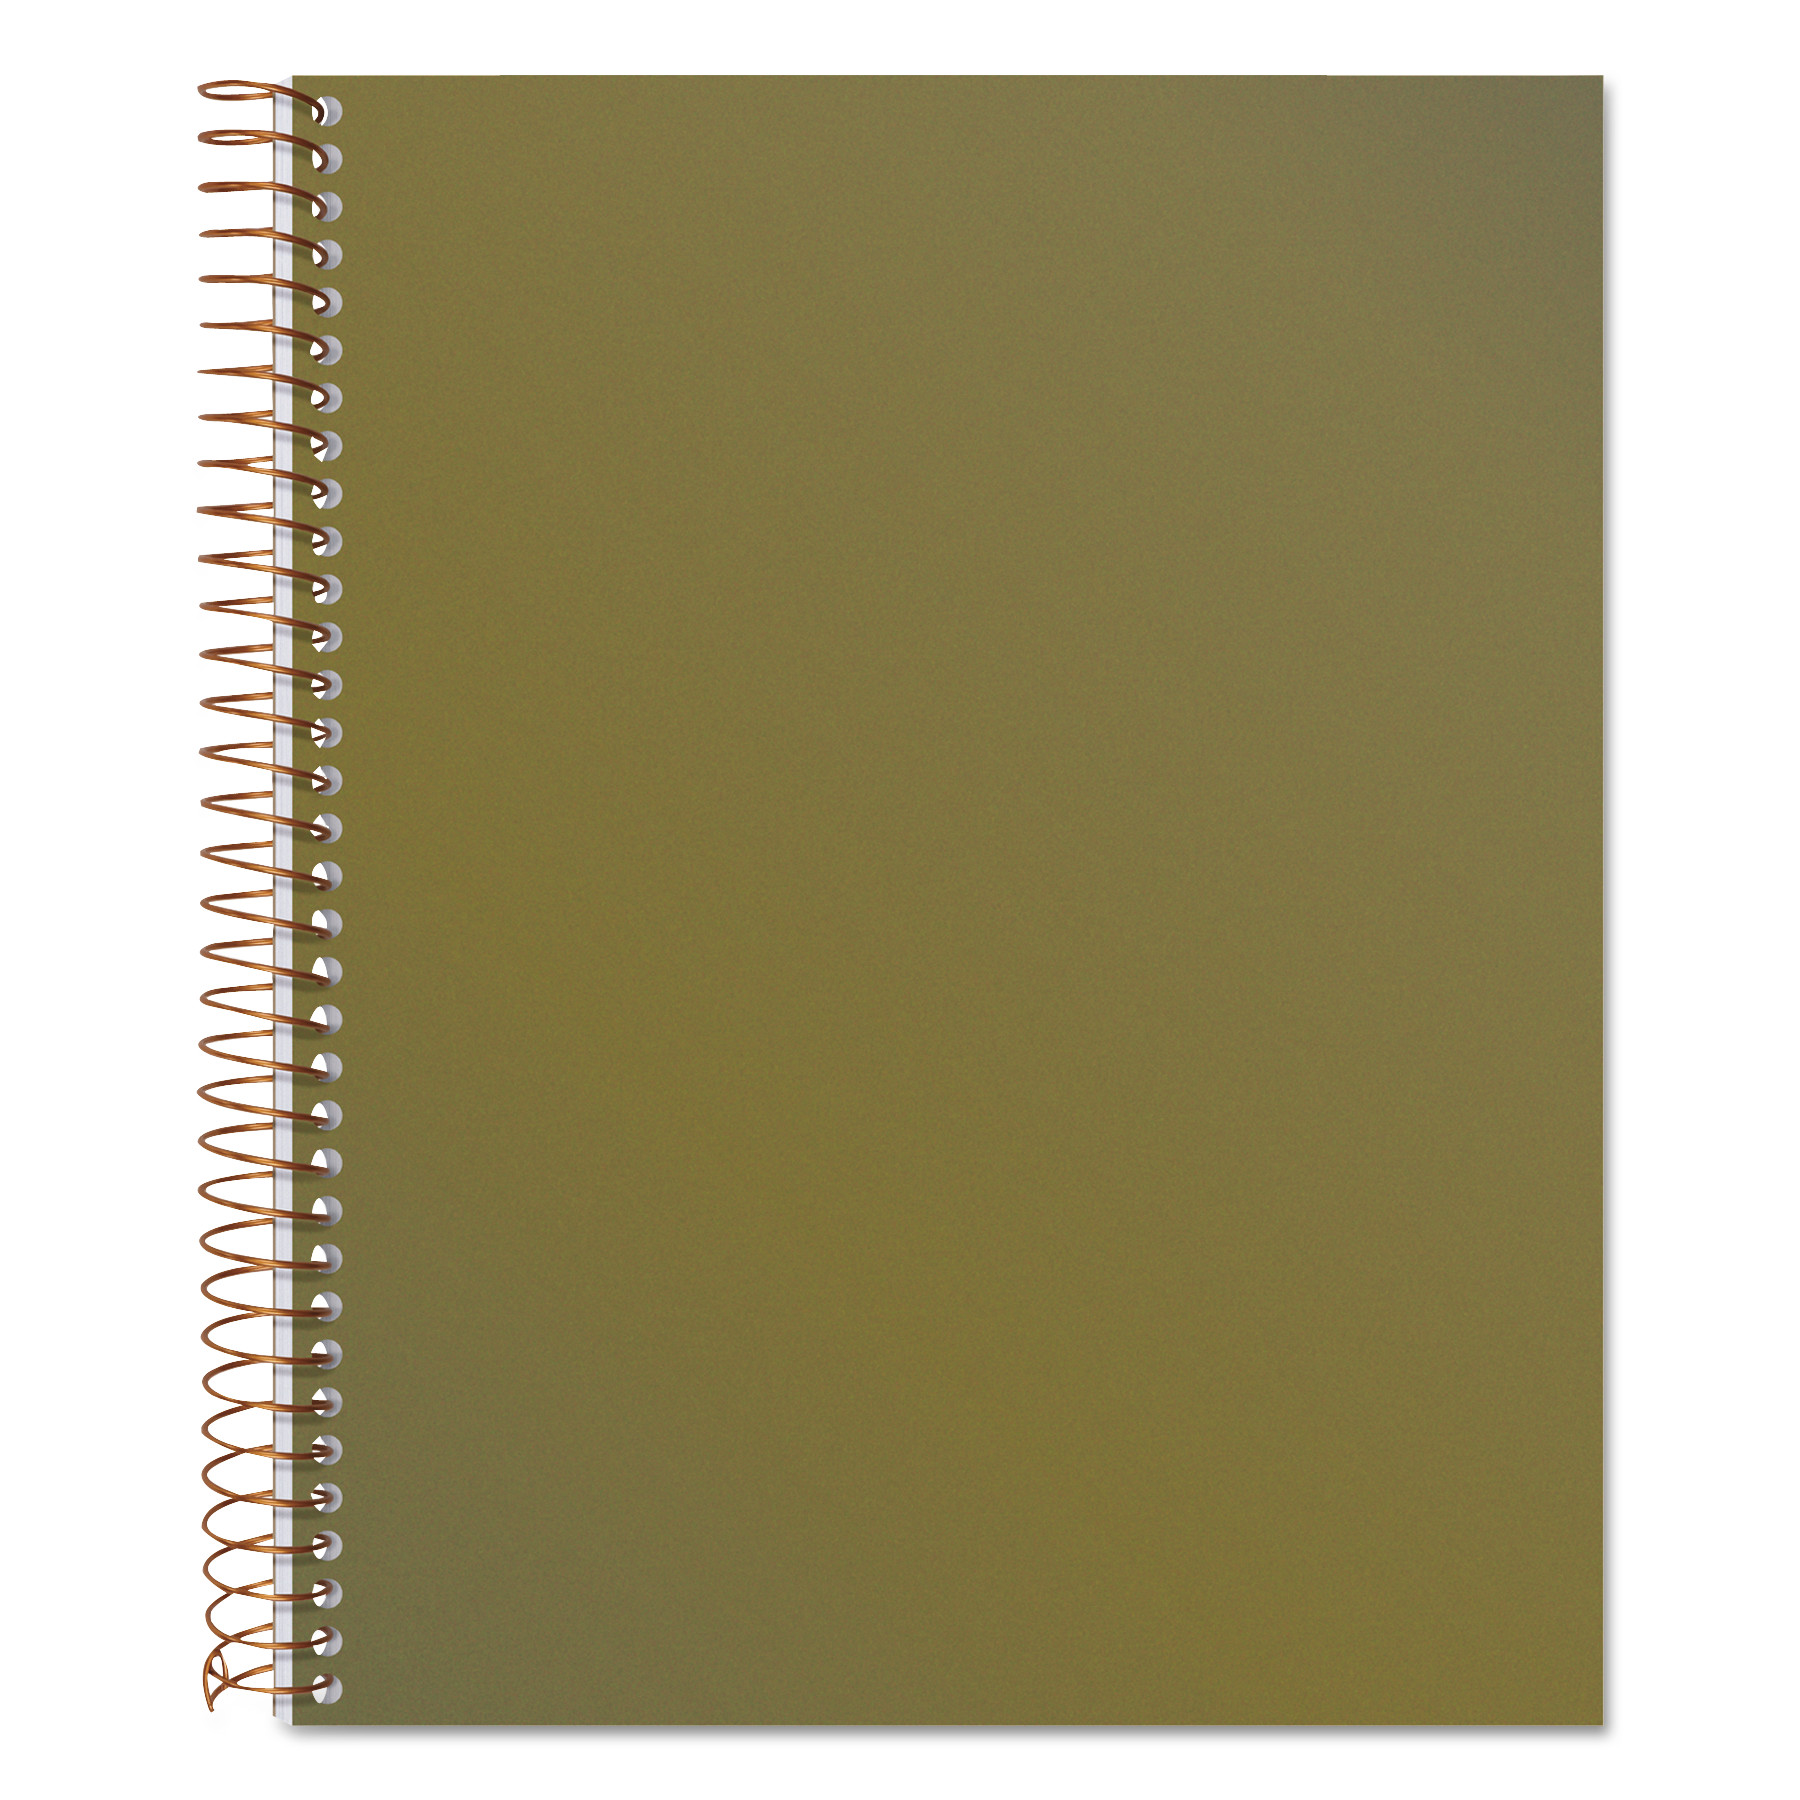  TOPS 63826 Docket Gold Planners & Project Planners, Narrow, Bronze, 8.5 x 6.75, 70 Sheets (TOP63826) 